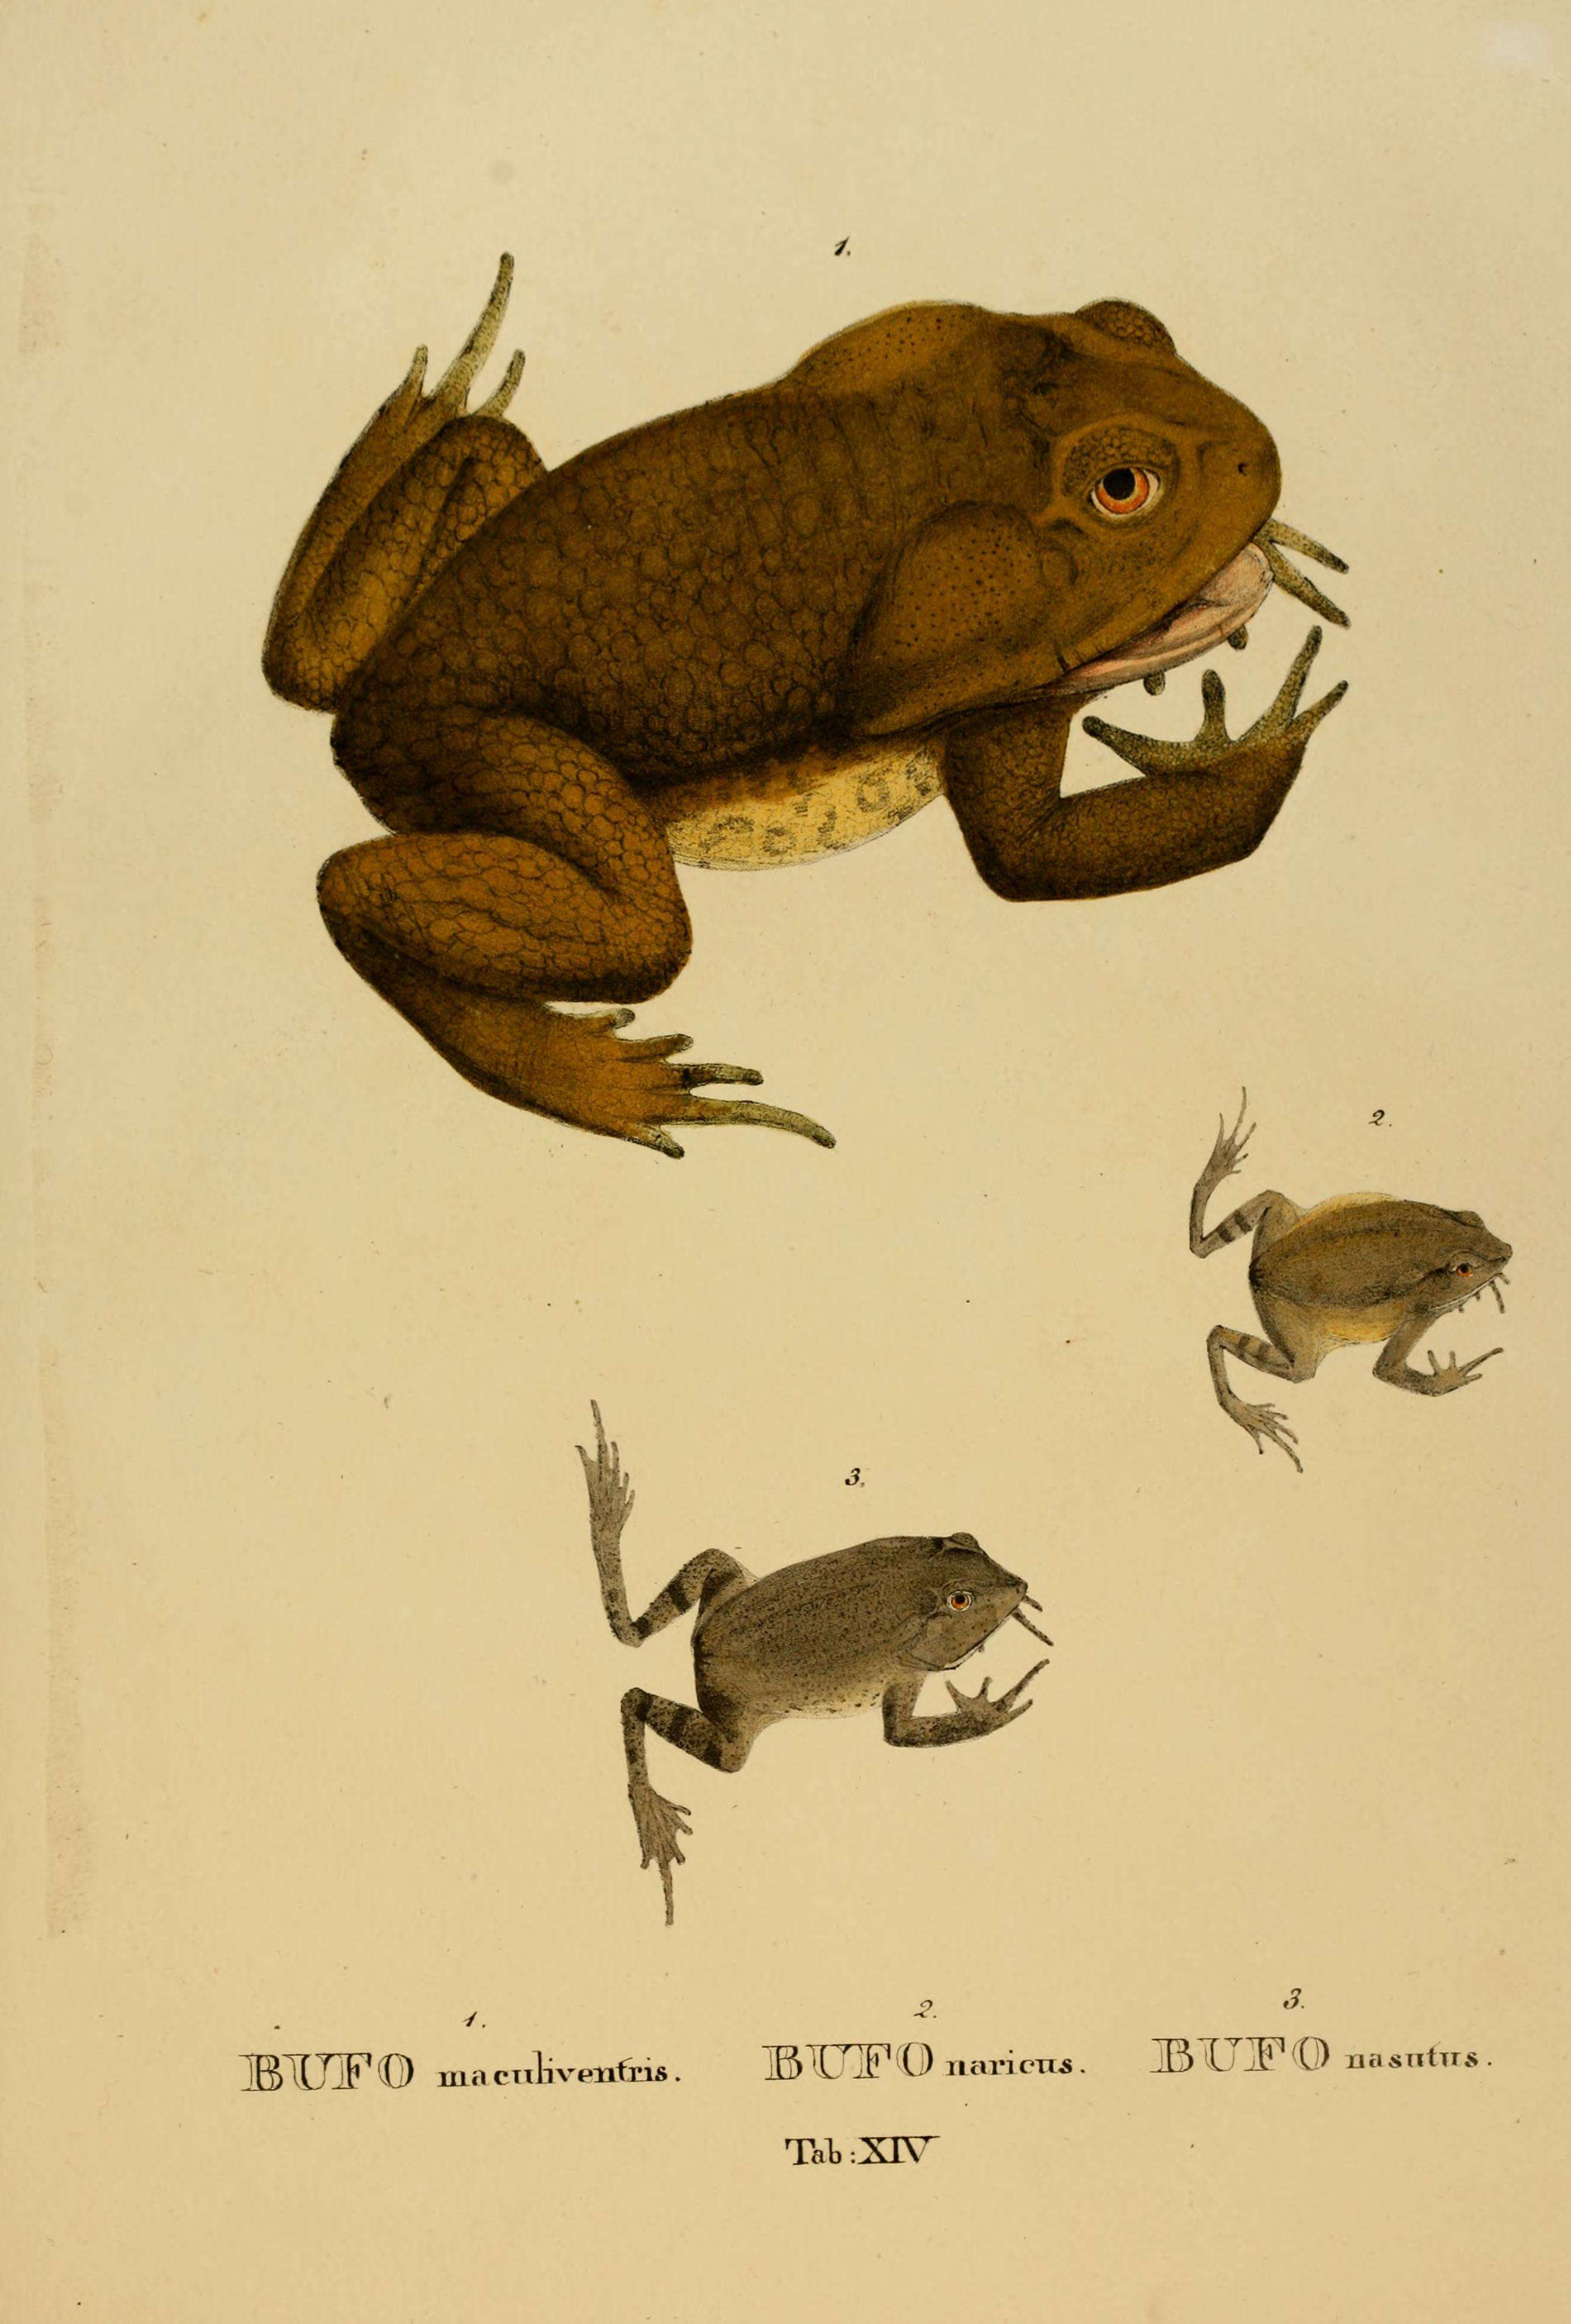 Image of Asiatic Toad